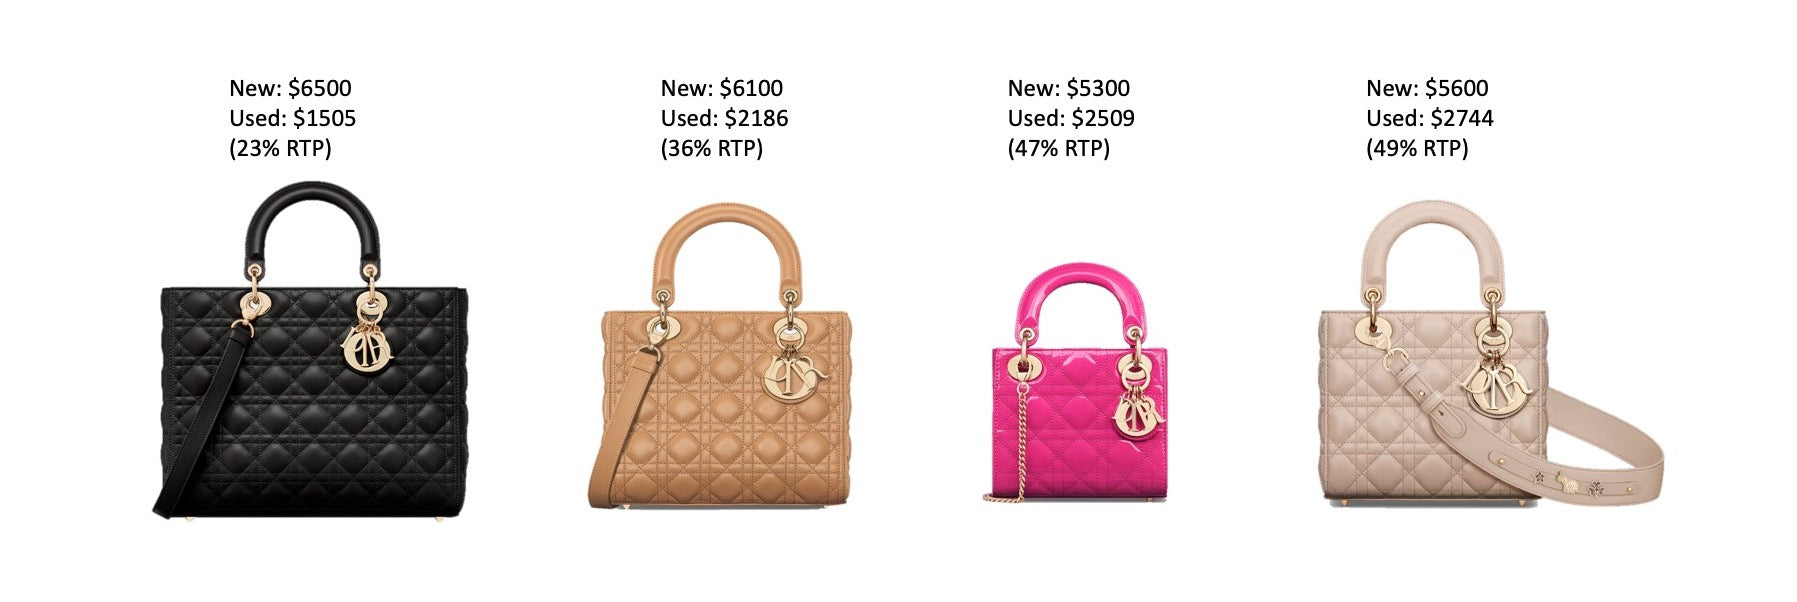 lady dior price ranked from low to high in secondhand market by size